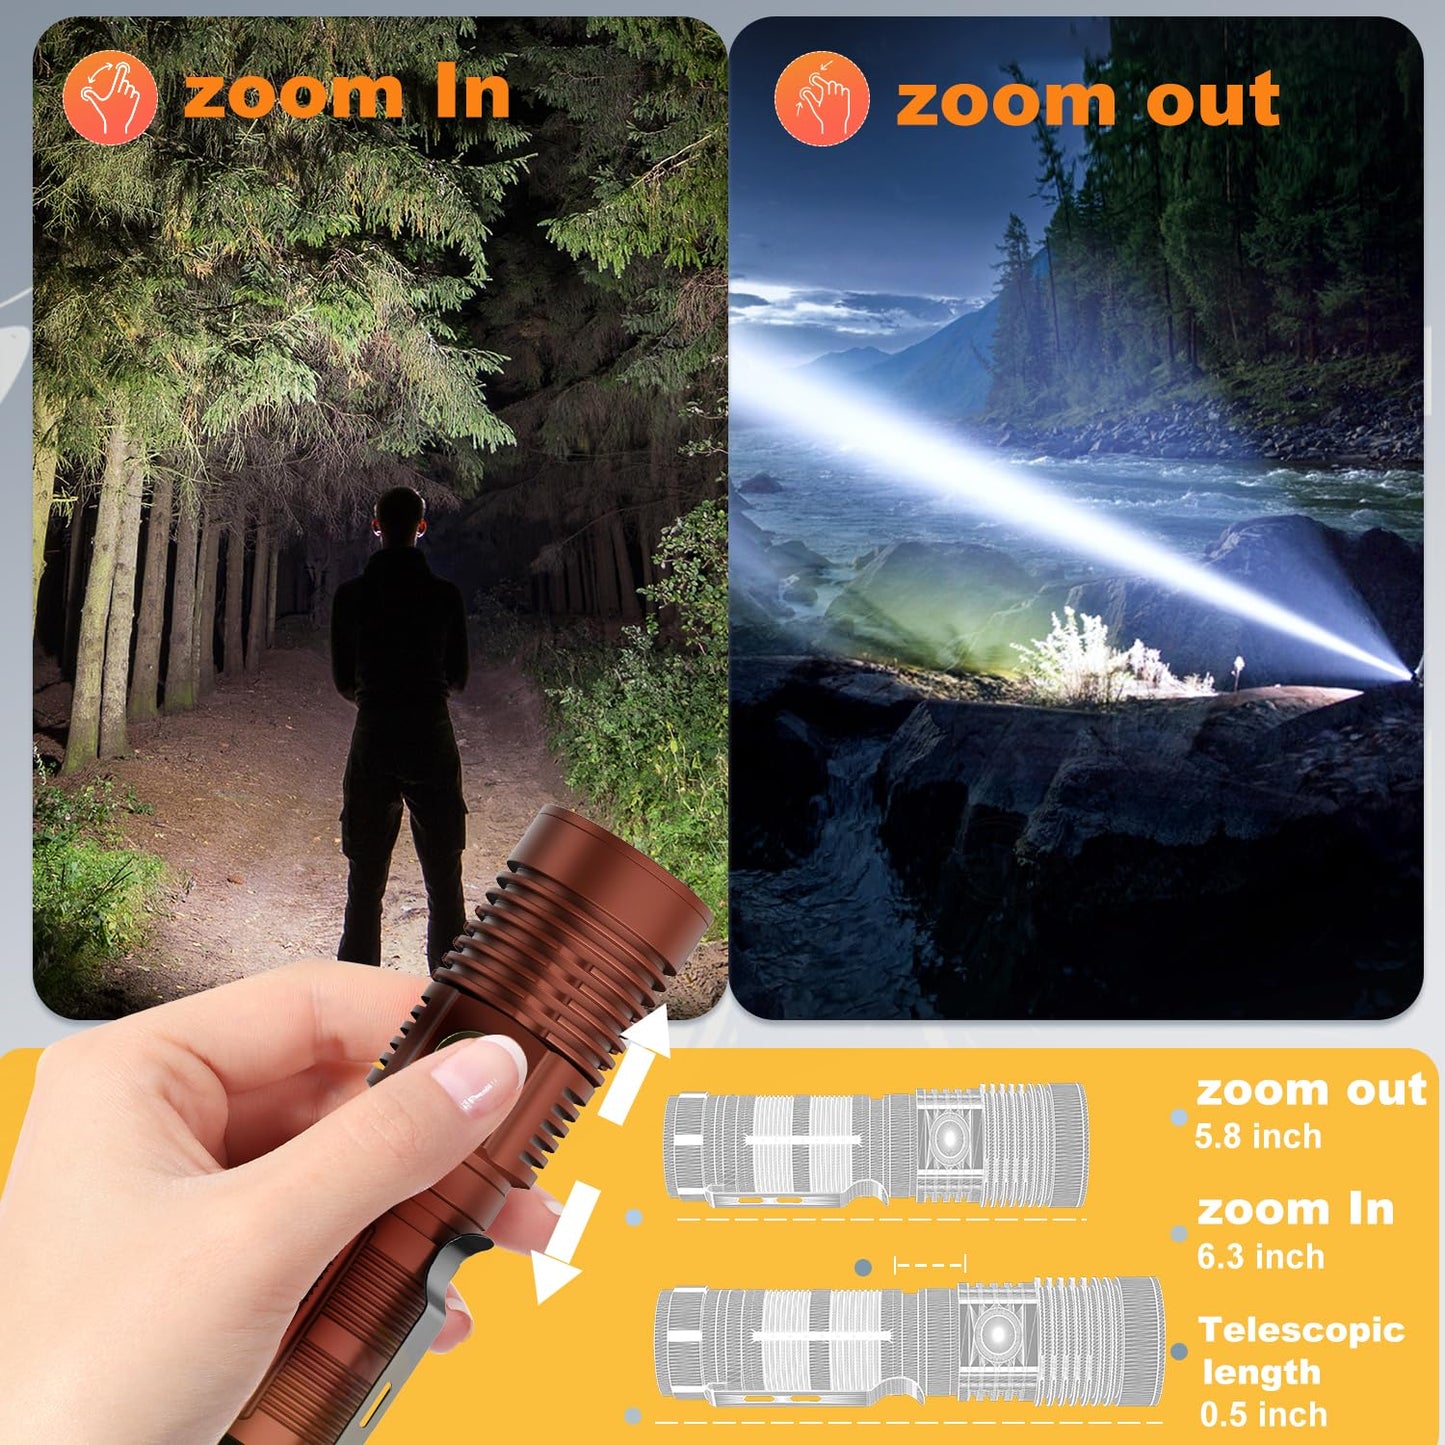 Small Tactical Flashlights 20000 High Lumens - 1500 Meters Long Beam Super Bright LED Magnetic Flashlight USB Rechargeable Zoomable 5Modes Long Beam Spotlight Flashlight for Hiking, Camping-Brown